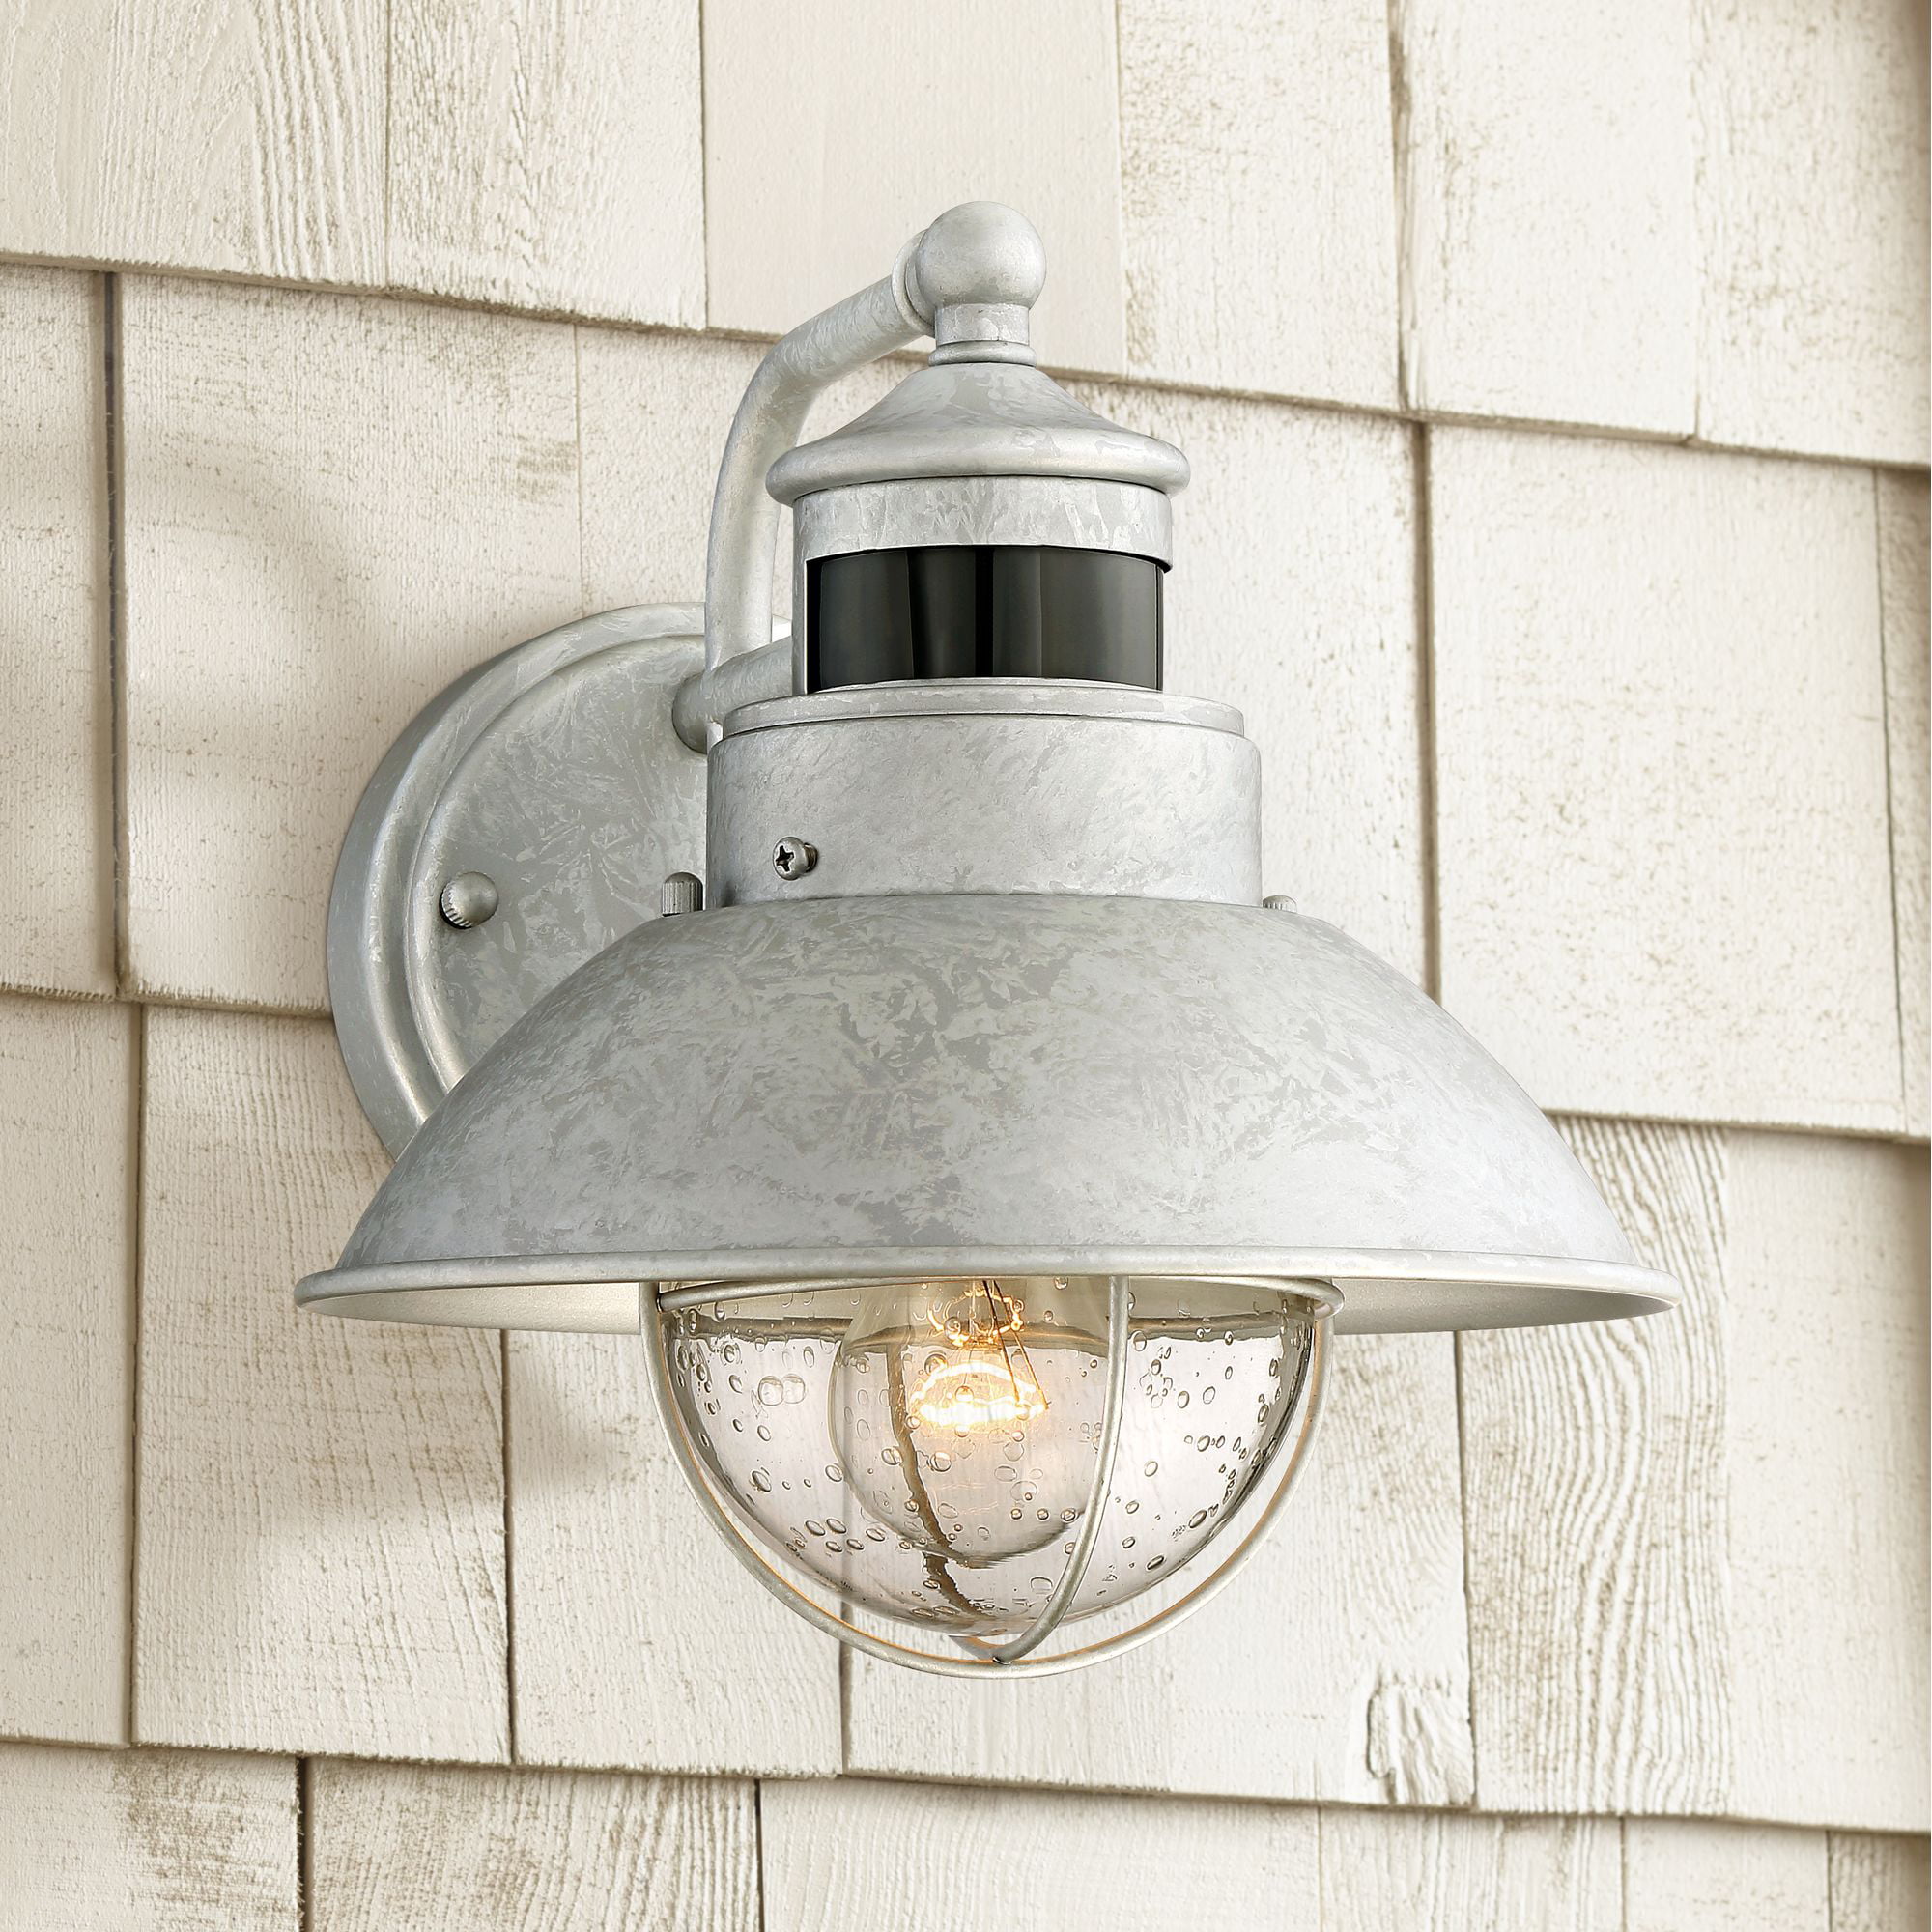 Outdoor Farmhouse Porch Wall Fixture in Galvanized Finish /& White Reflective Interior CORAMDEO Oakhouse Dusk to Dawn 6” Barn Light Photocell Sensor activates Fixture Automatically Wet Location